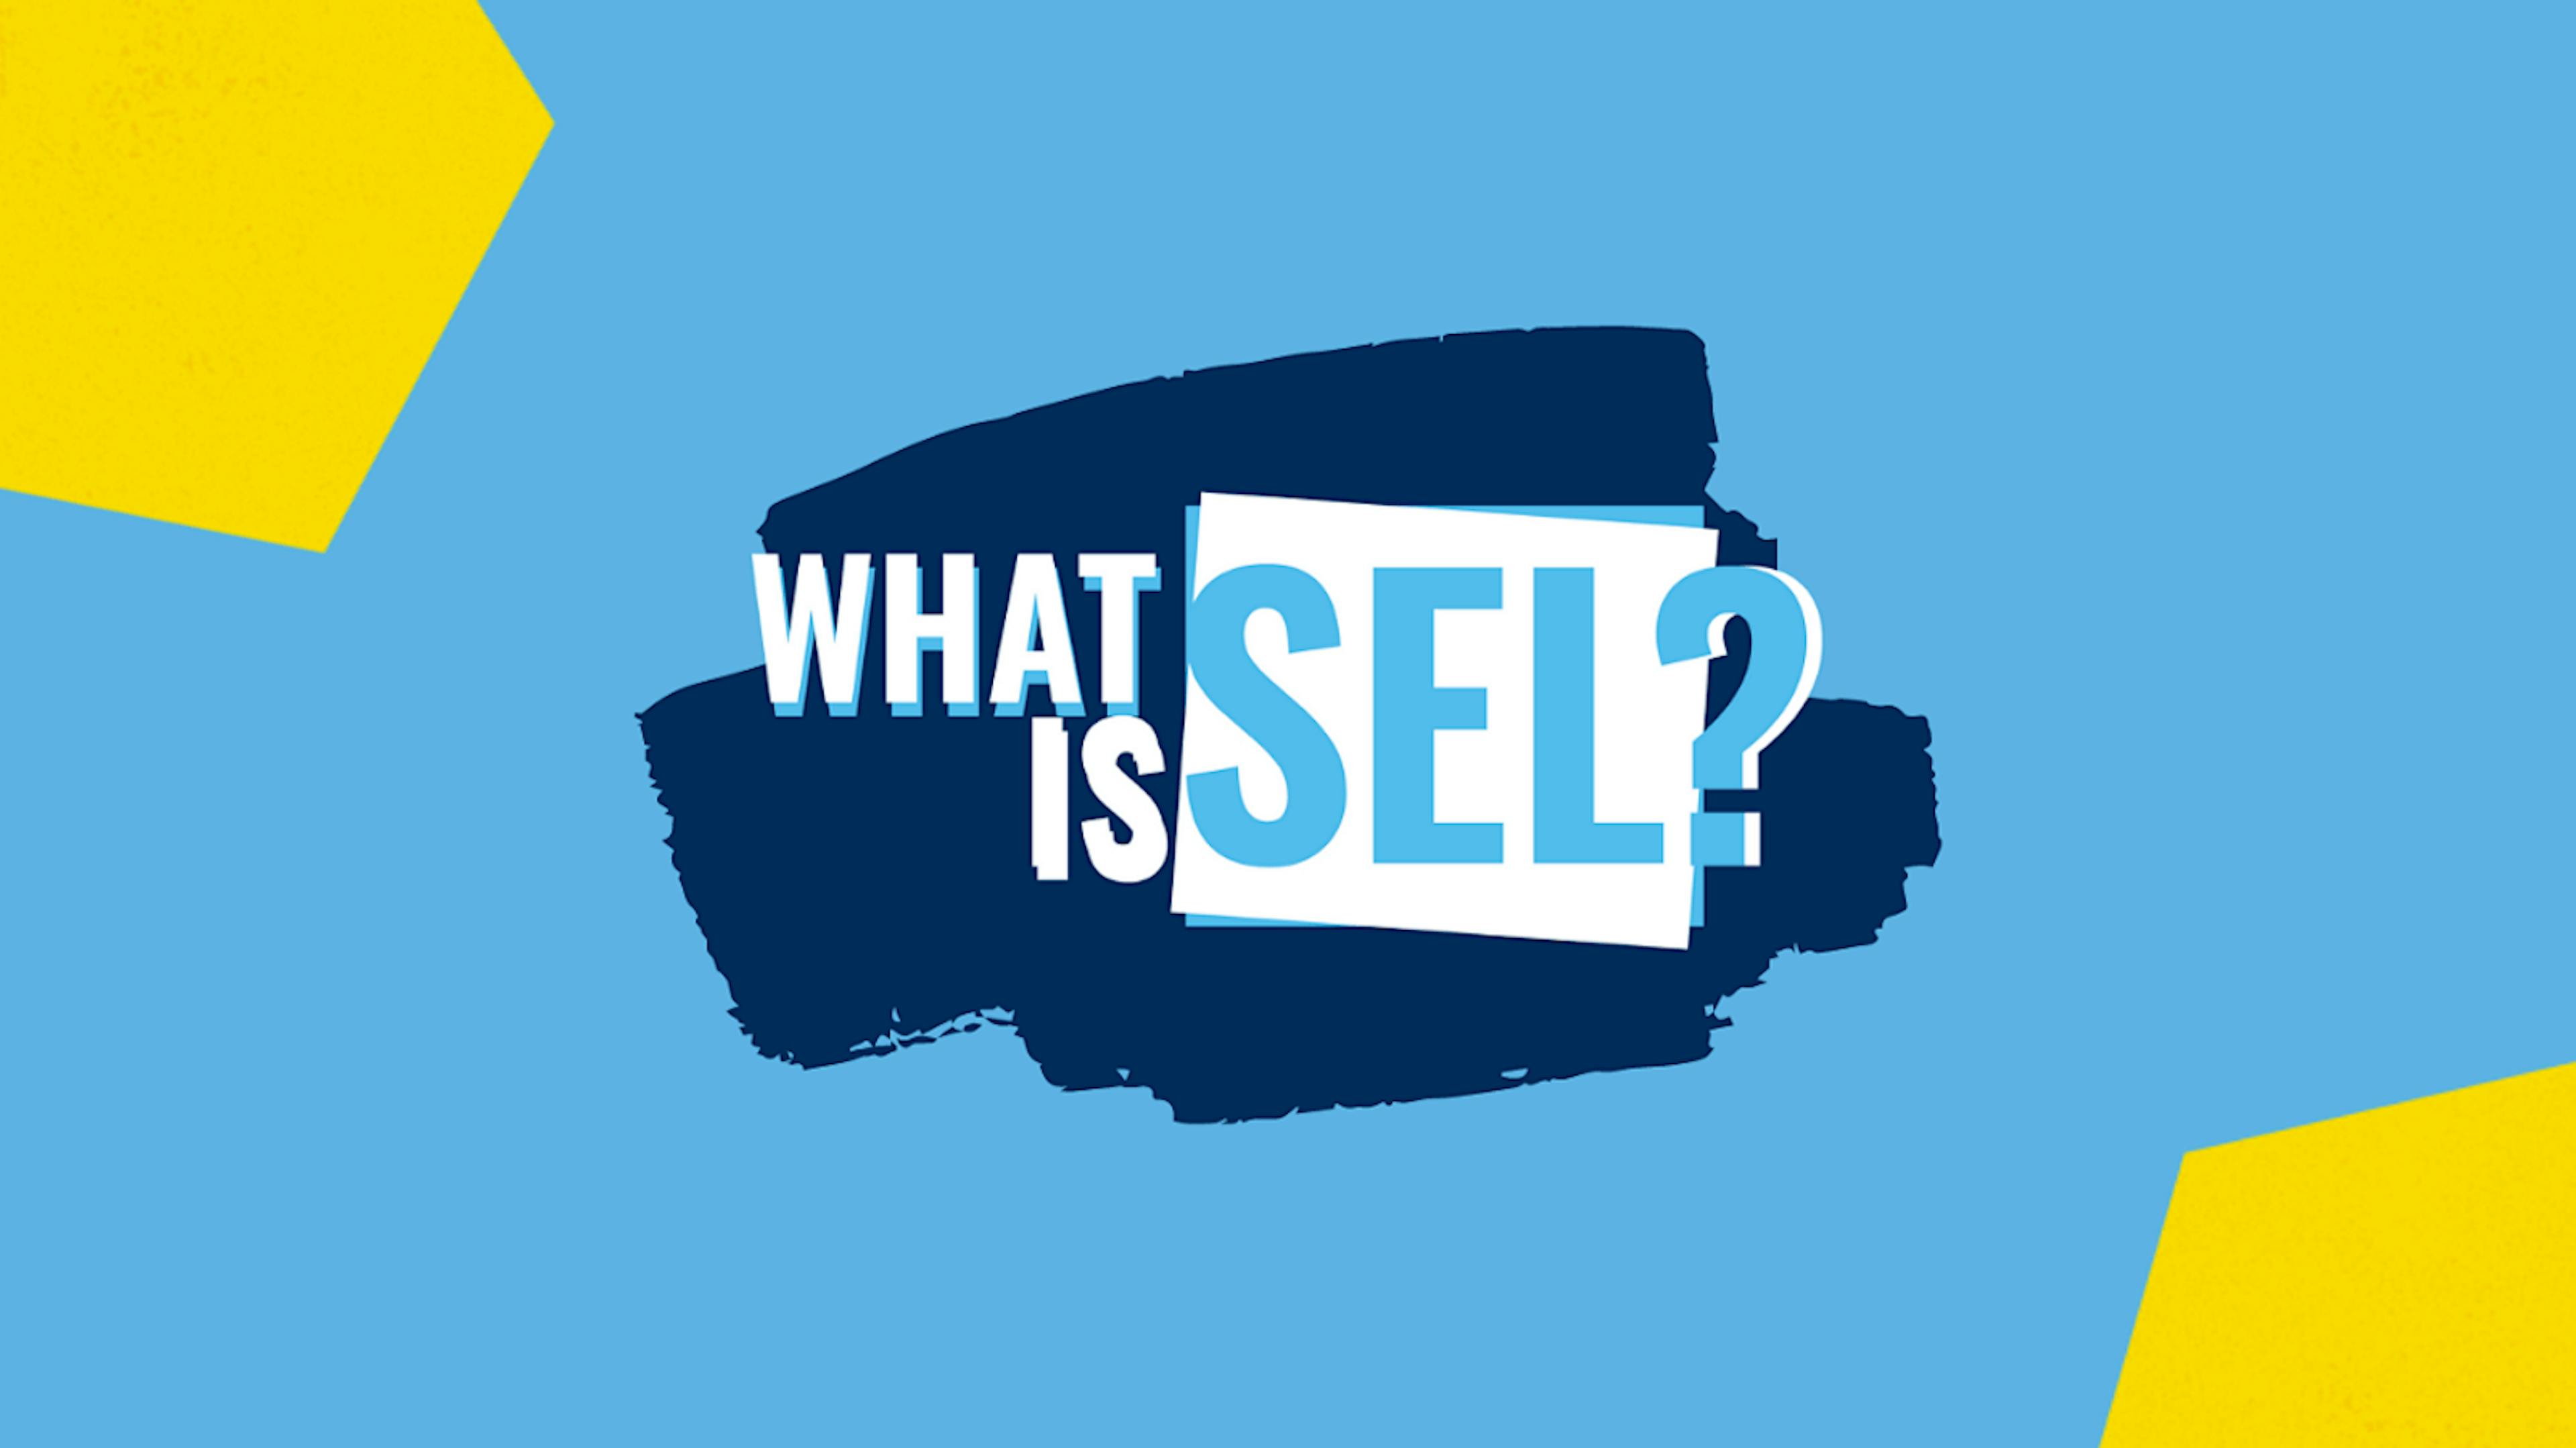 'What is SEL' text on a blue backdrop